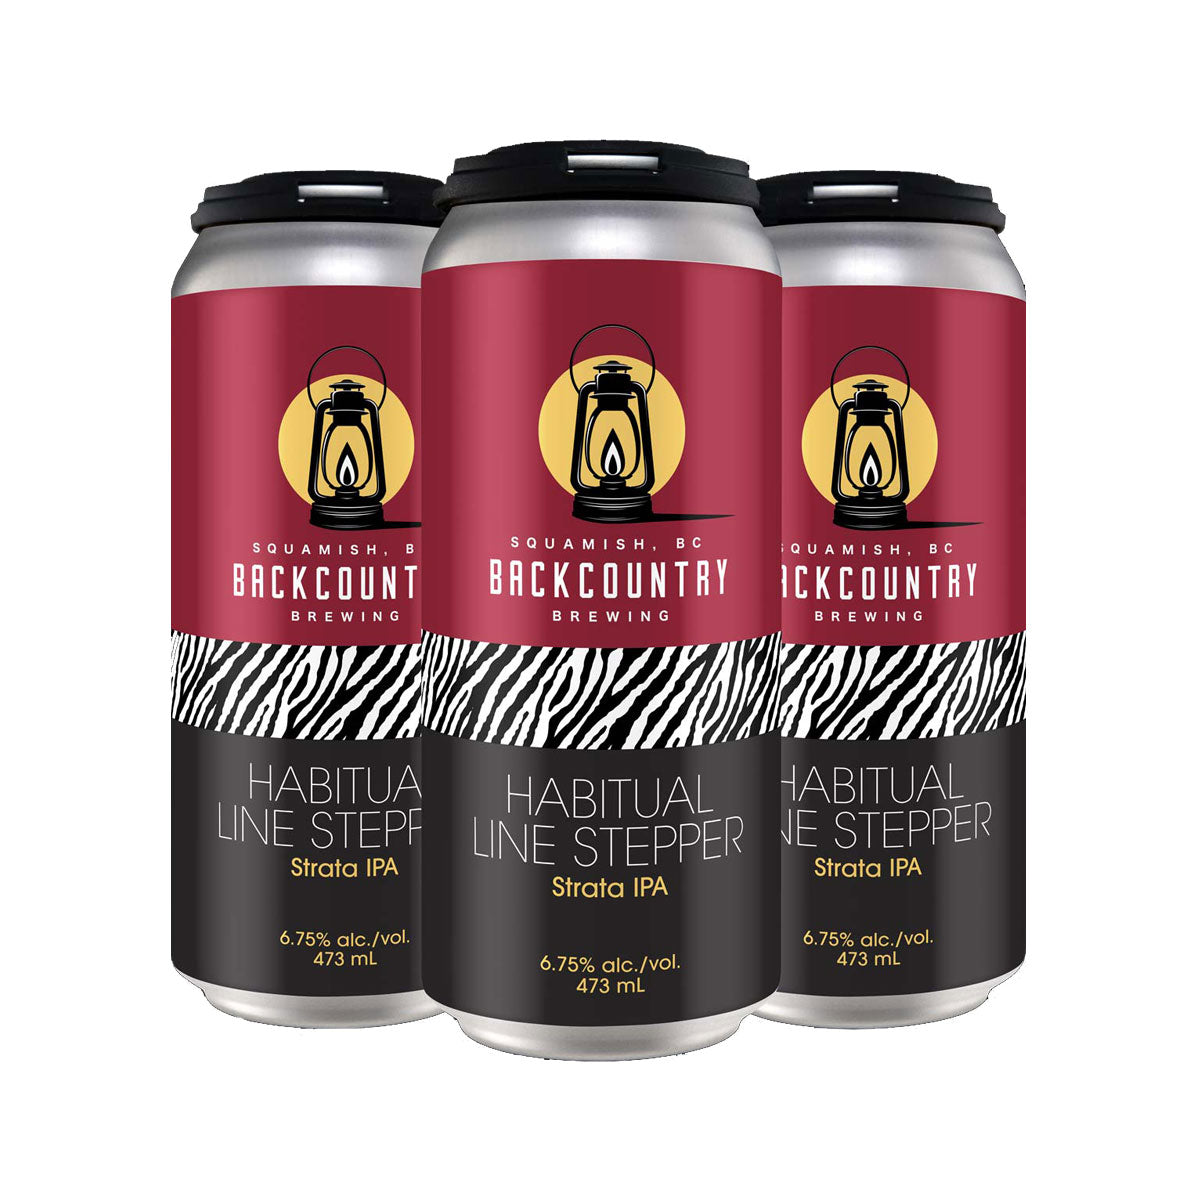 TAG Liquor Stores BC - Backcountry Brewing "Habitual Line Stepper" Strata IPA 4 Pack Cans